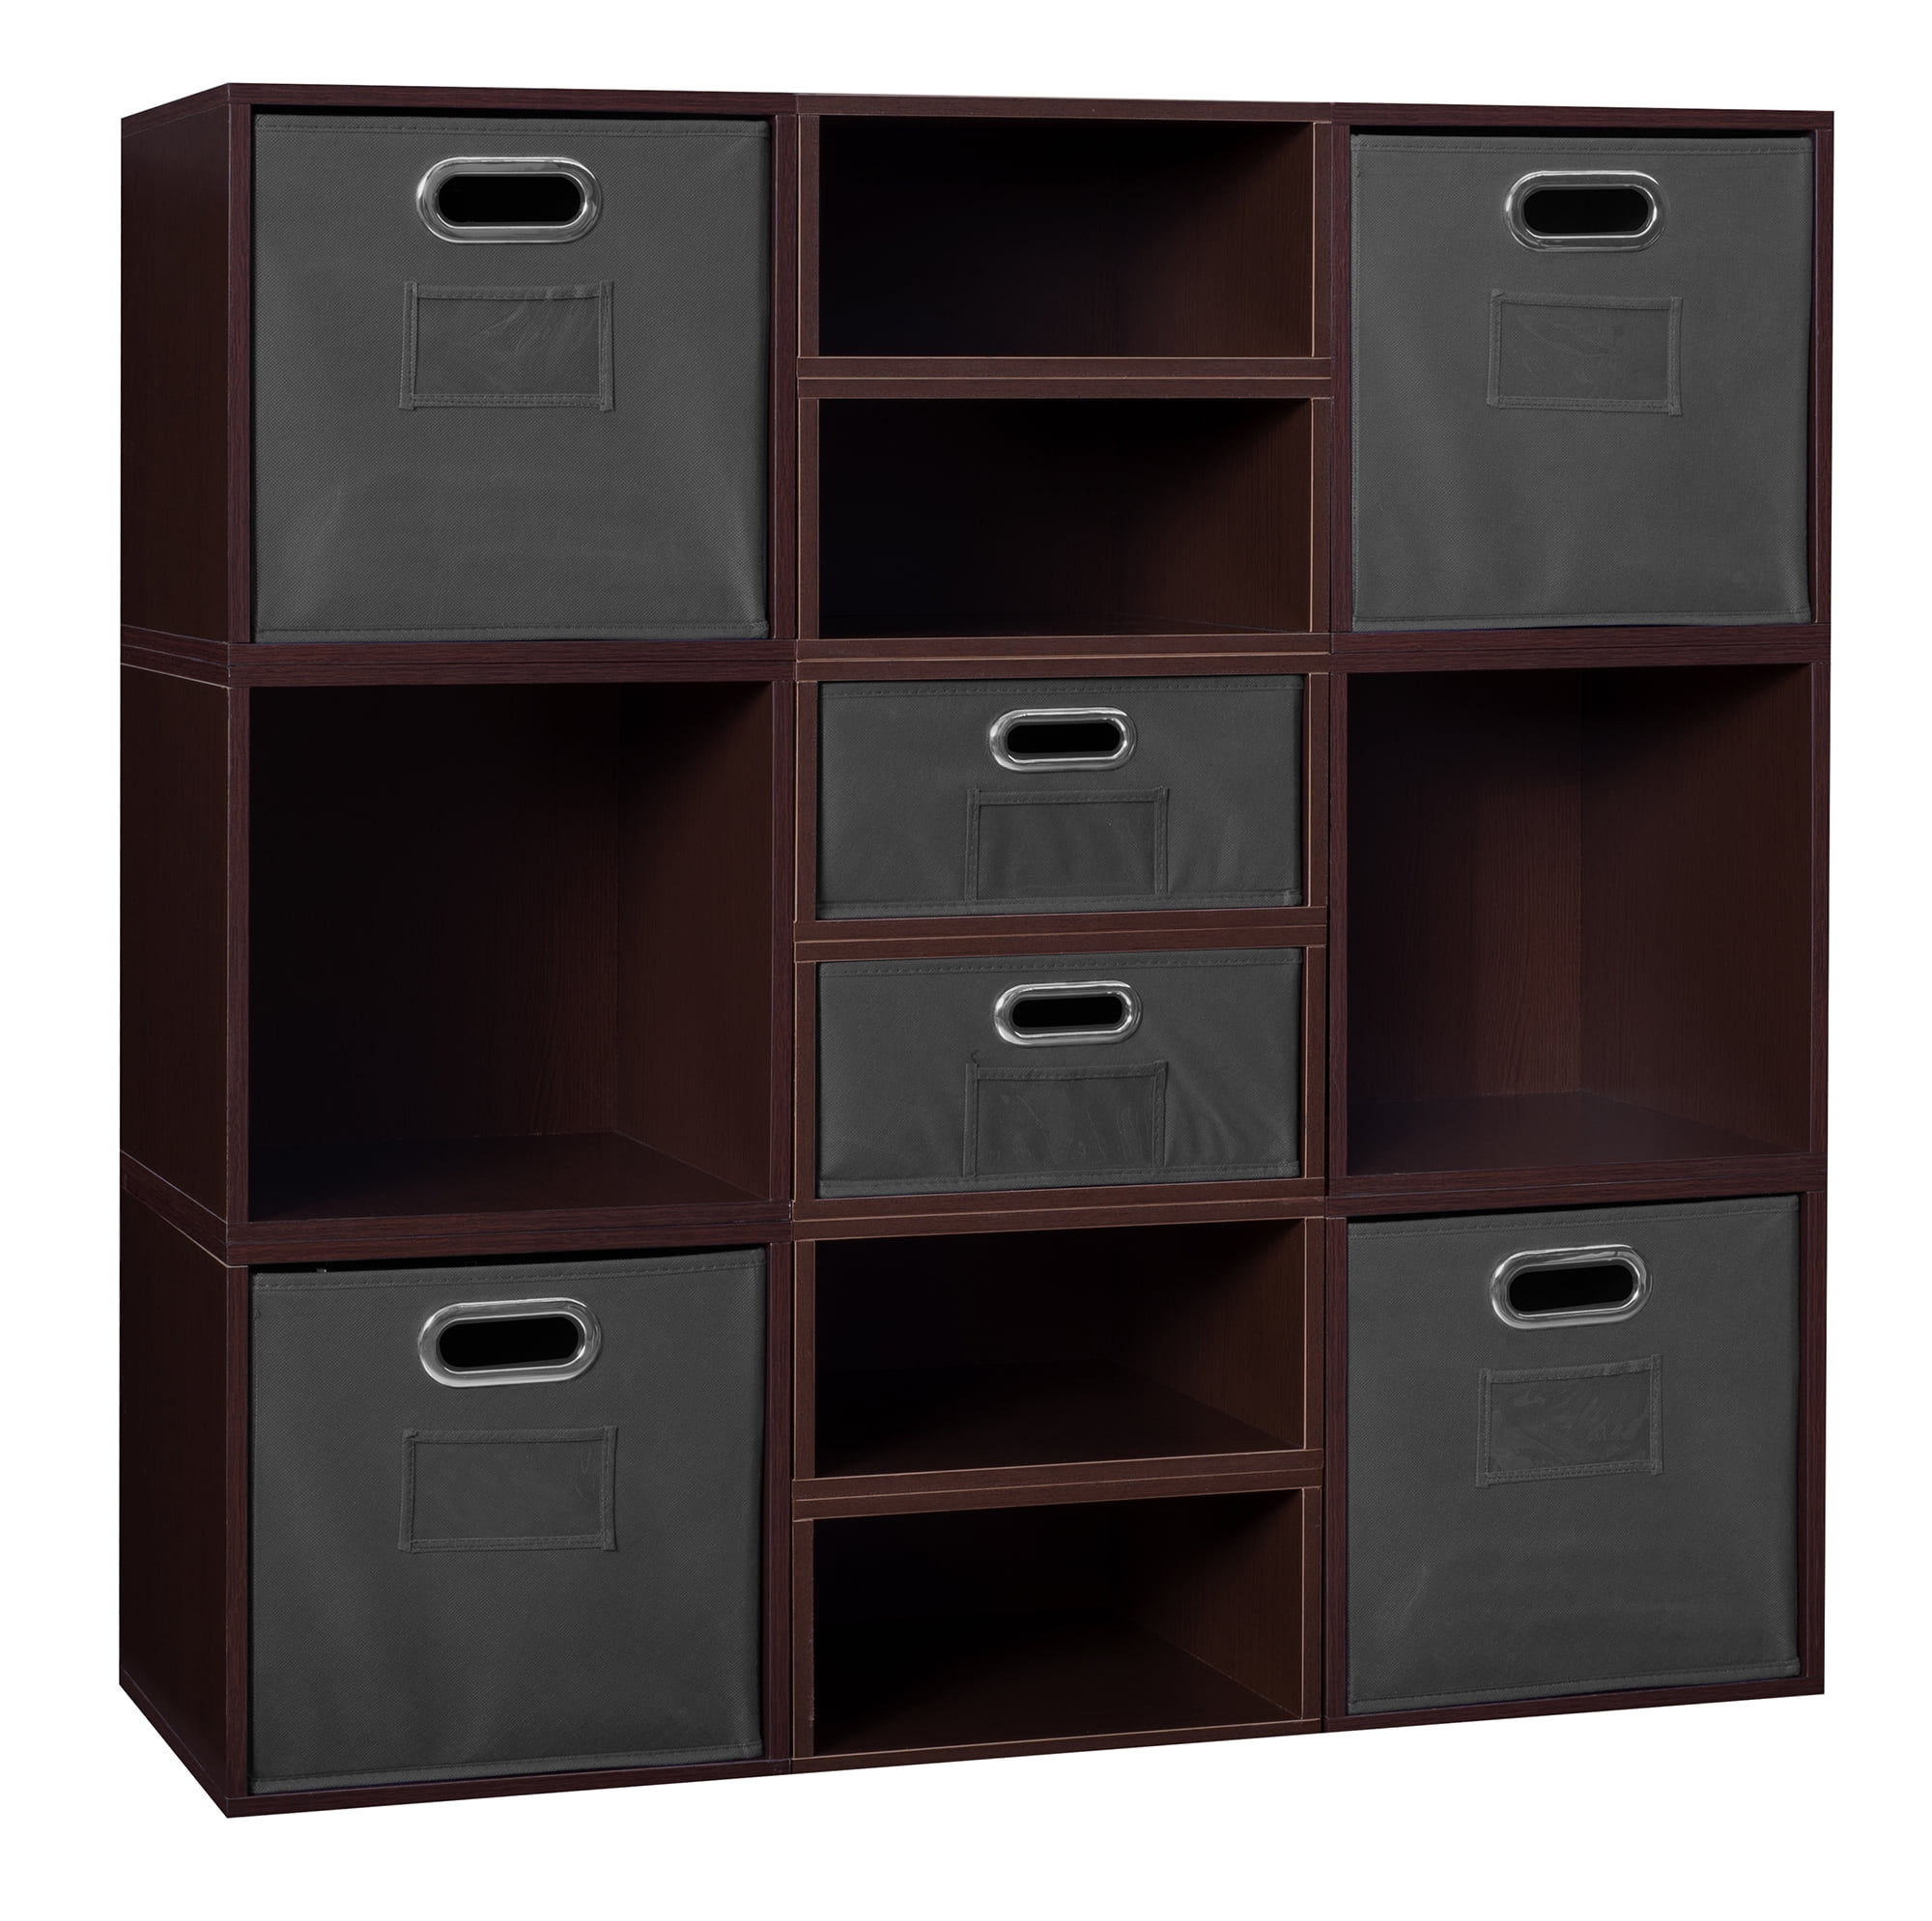 Niche Cubo Storage Set 6 Full Cubes/6 Half Cubes with Foldable Storage